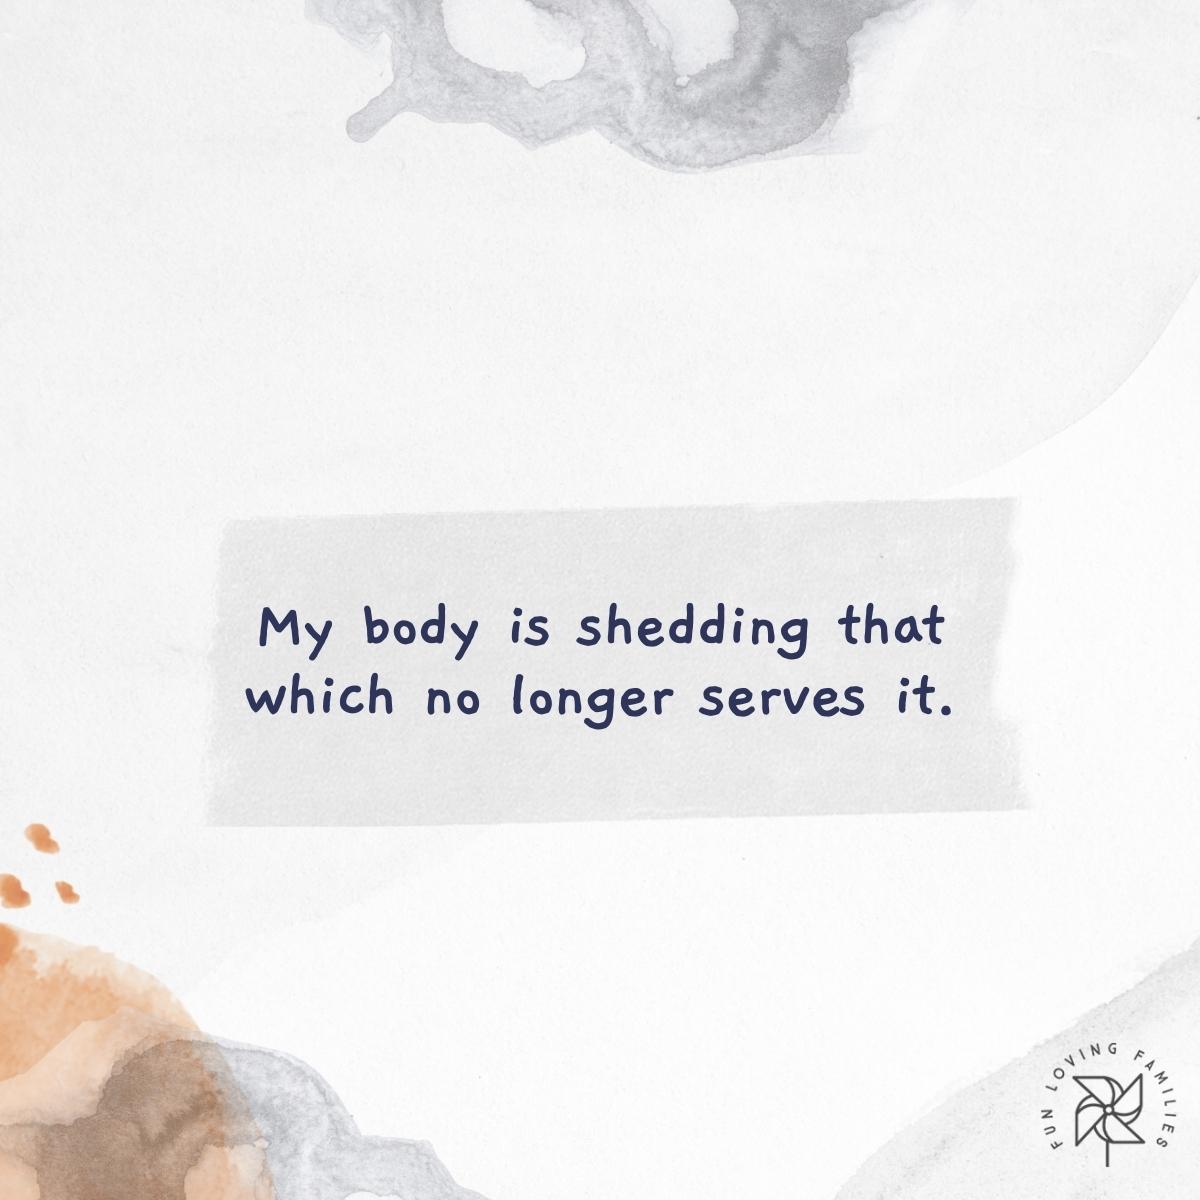 My body is shedding that which no longer serves it affirmation